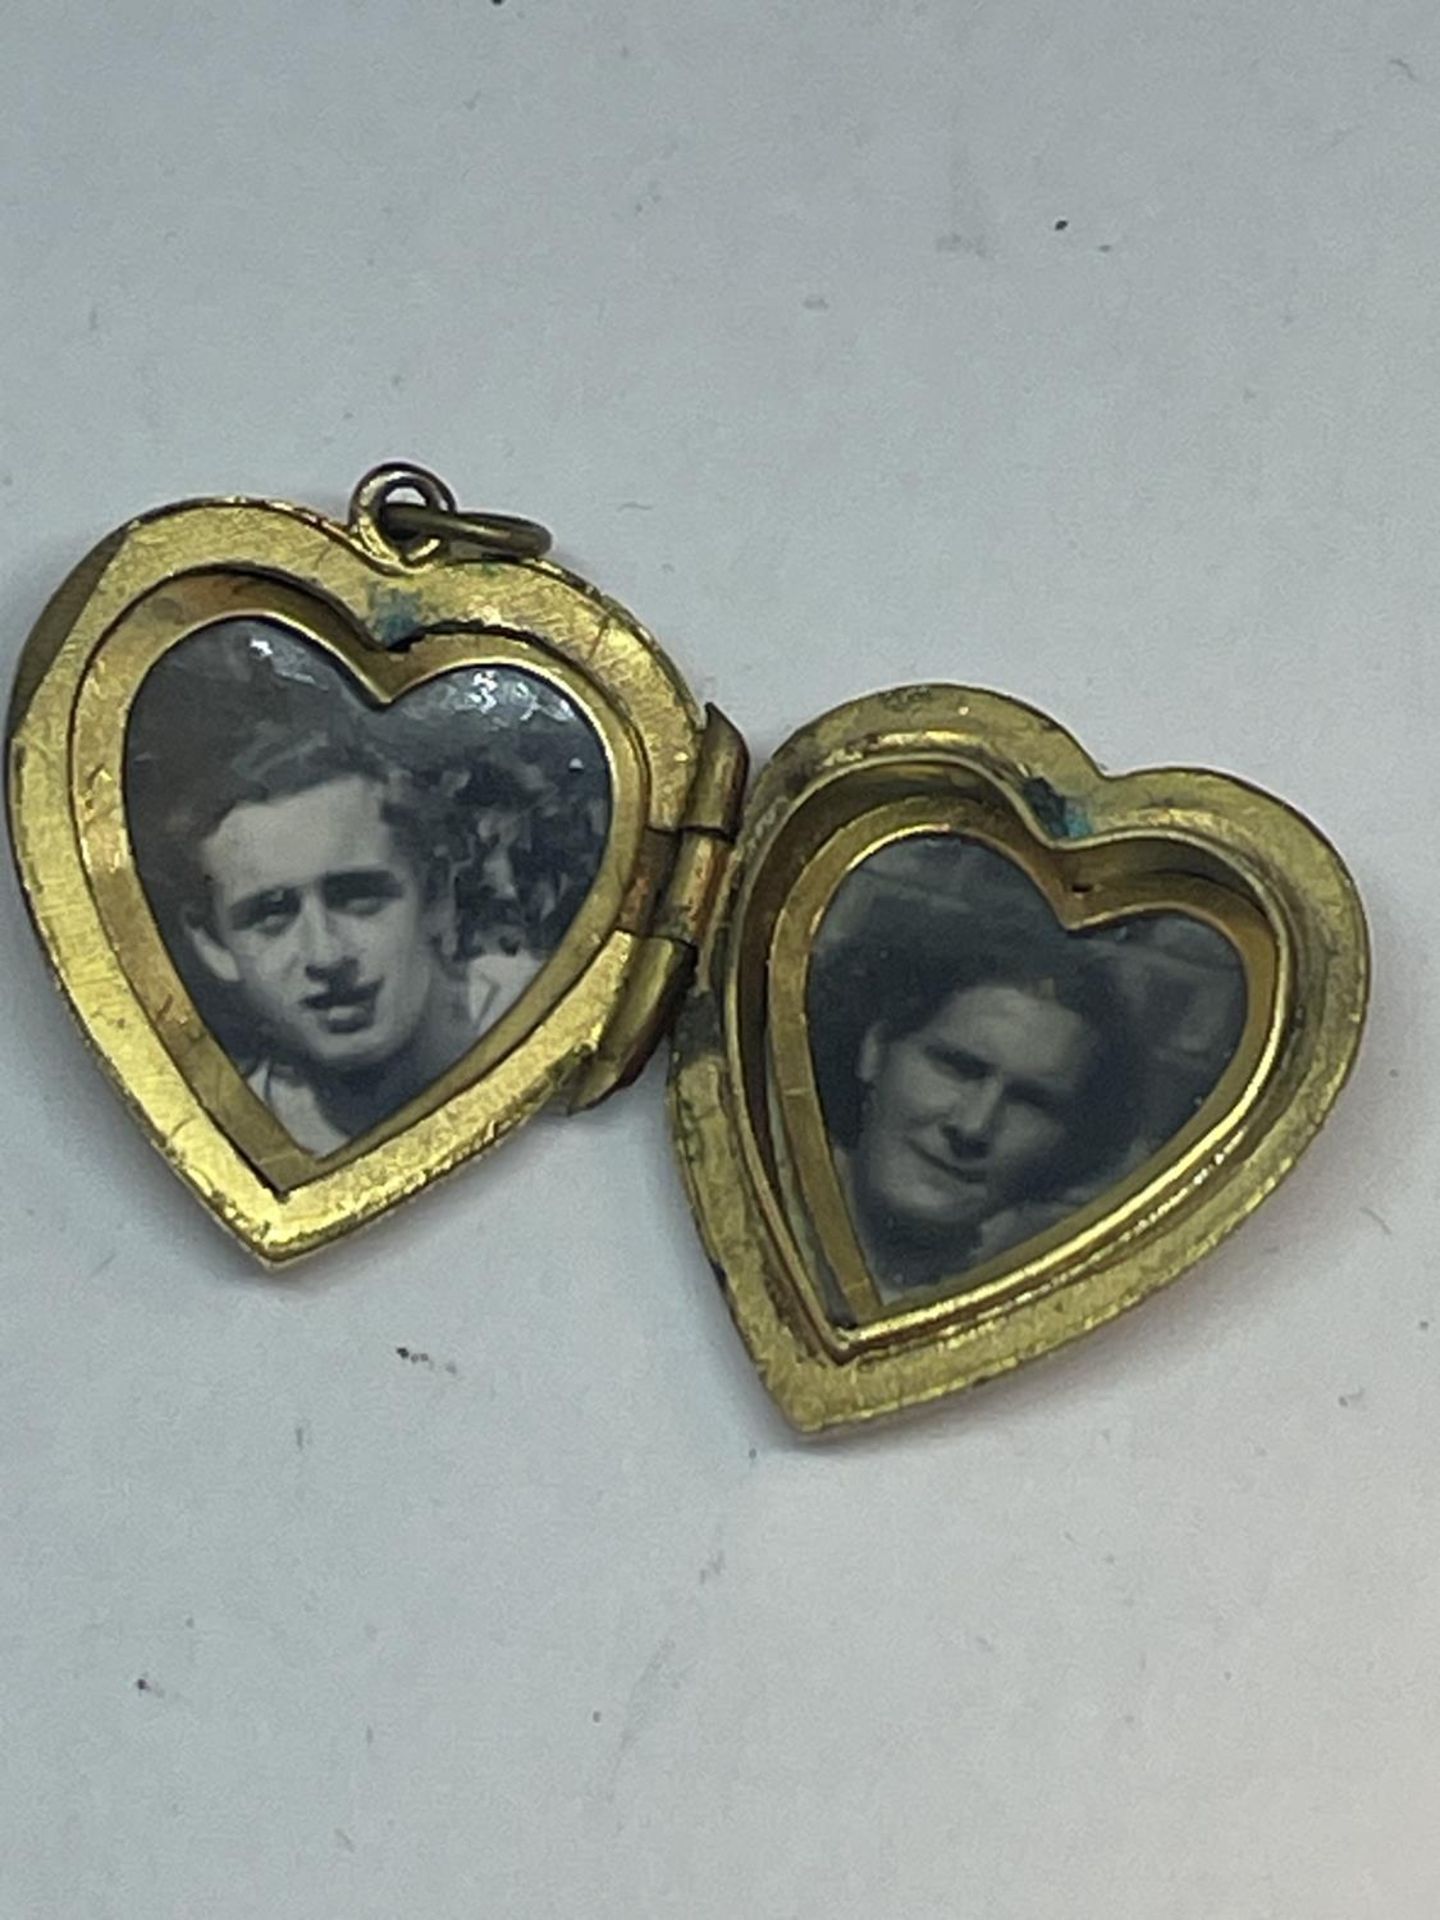 A 9 CARAT GOLD HEART LOCKET WITH VINTAGE PHOTOGRAPHS GROSS WEIGHT 3.28 GRAMS - Image 4 of 4